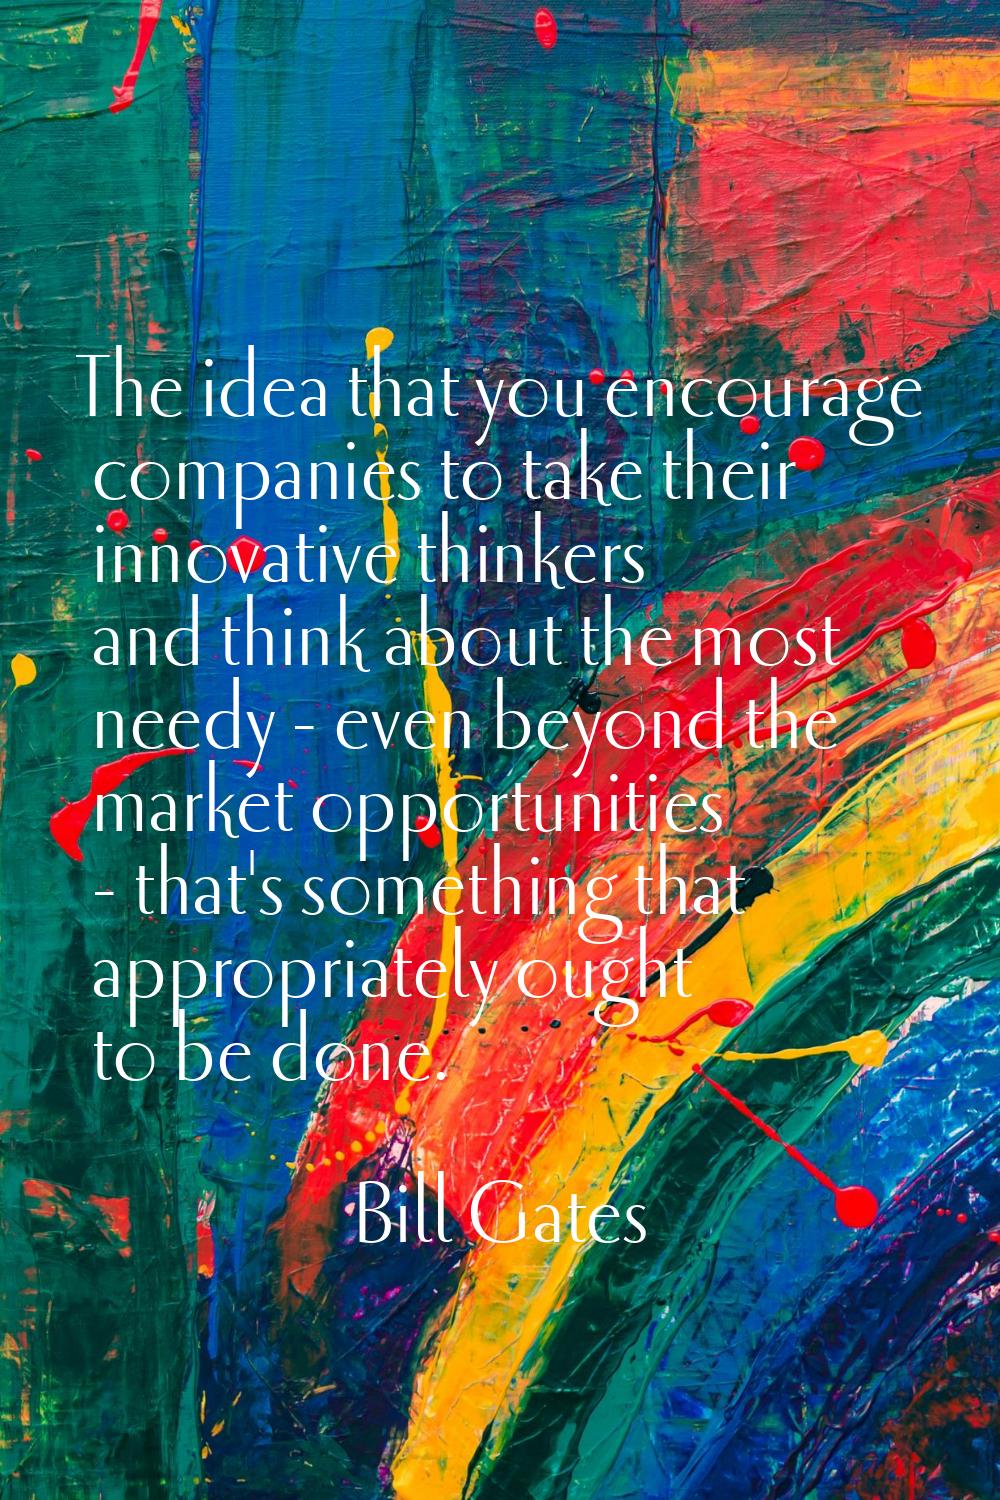 The idea that you encourage companies to take their innovative thinkers and think about the most ne